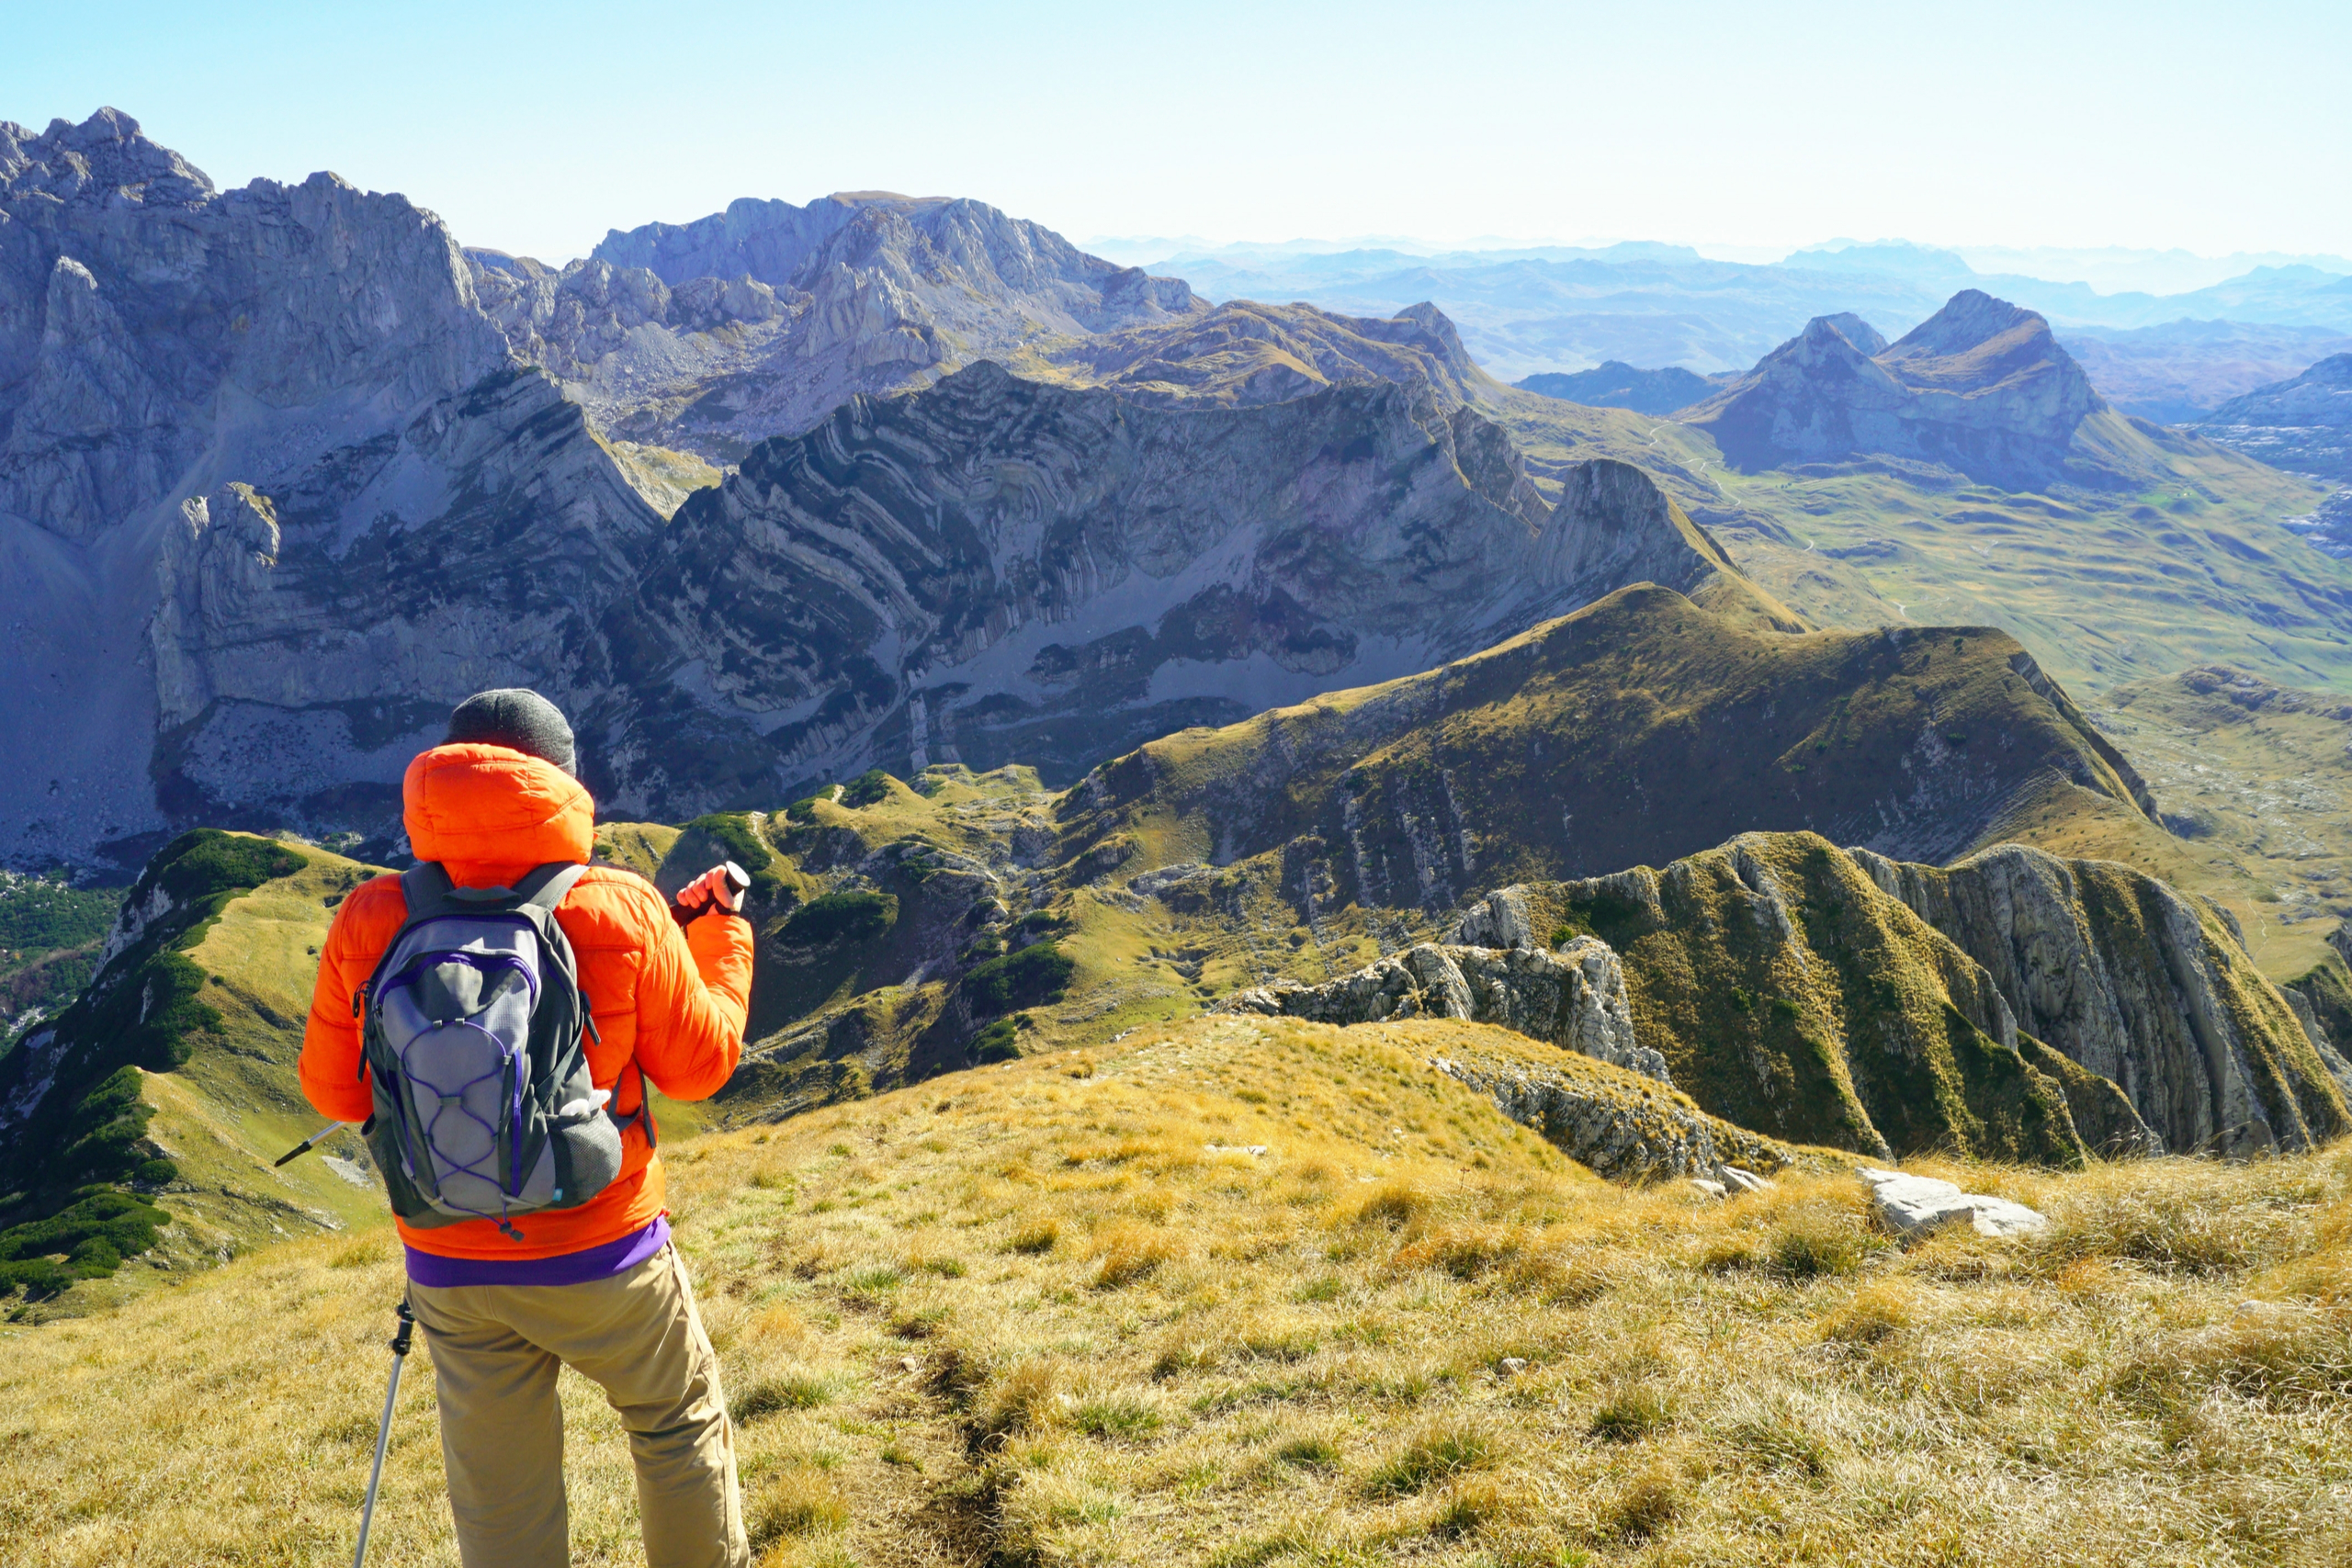 A hiker in Durmitor National Park.